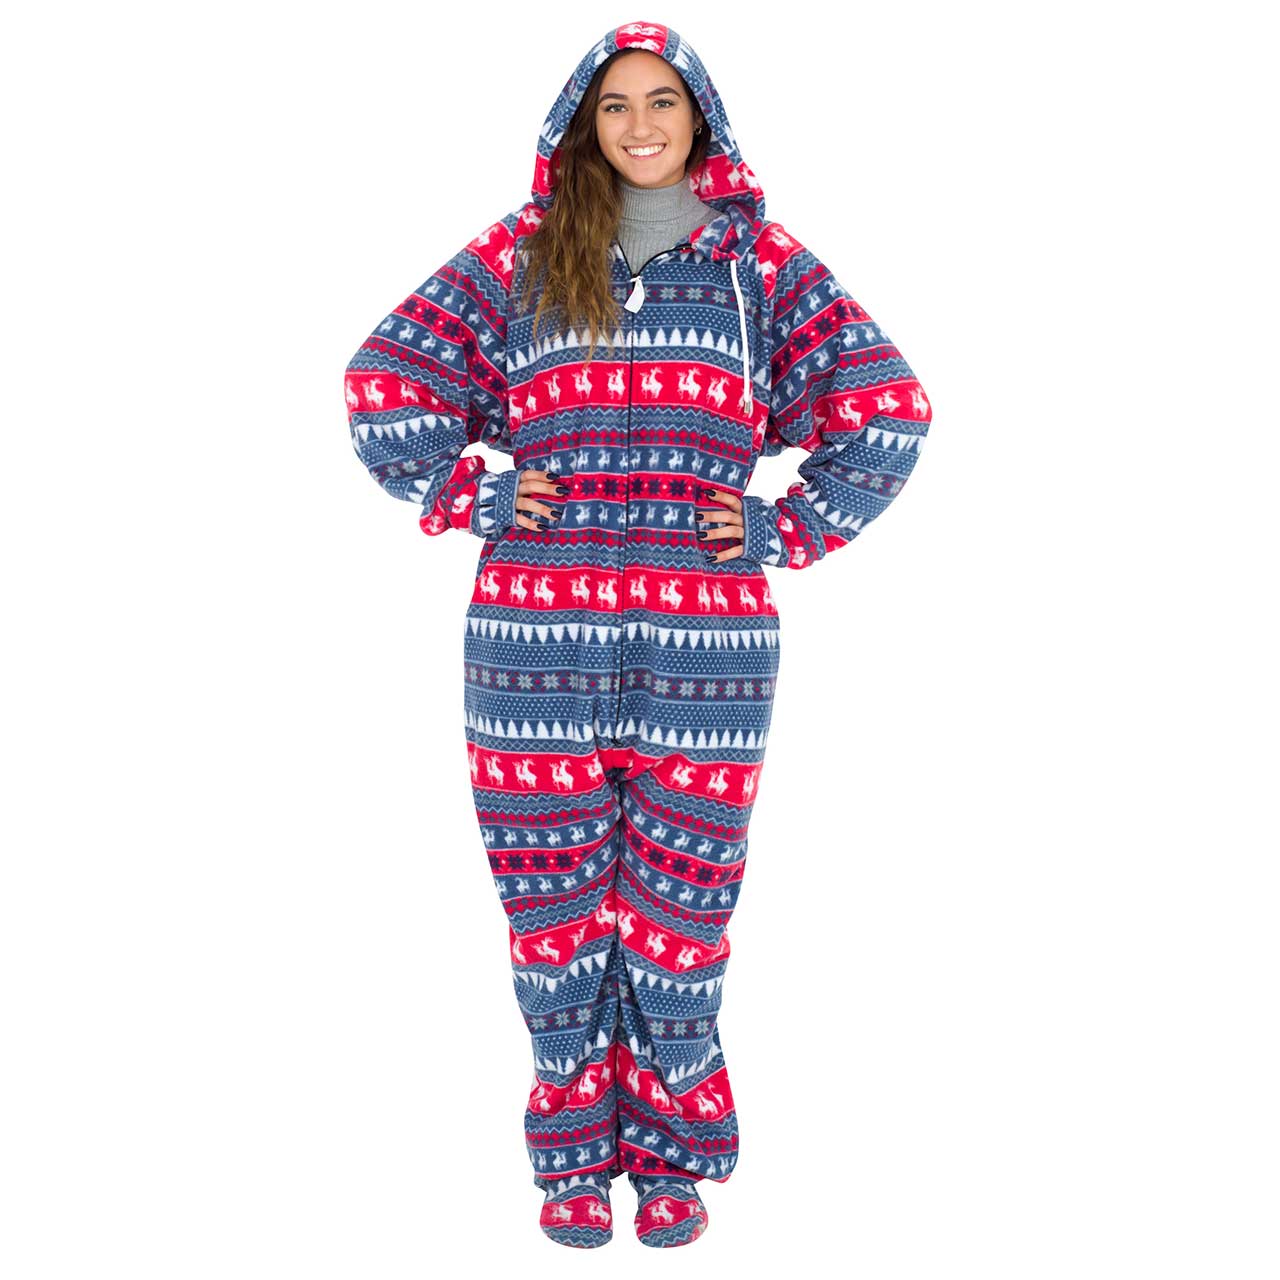 Red and Navy Humping Reindeer Ugly Christmas Pajama Suit with Hood,Specials : uglyschristmassweater.com